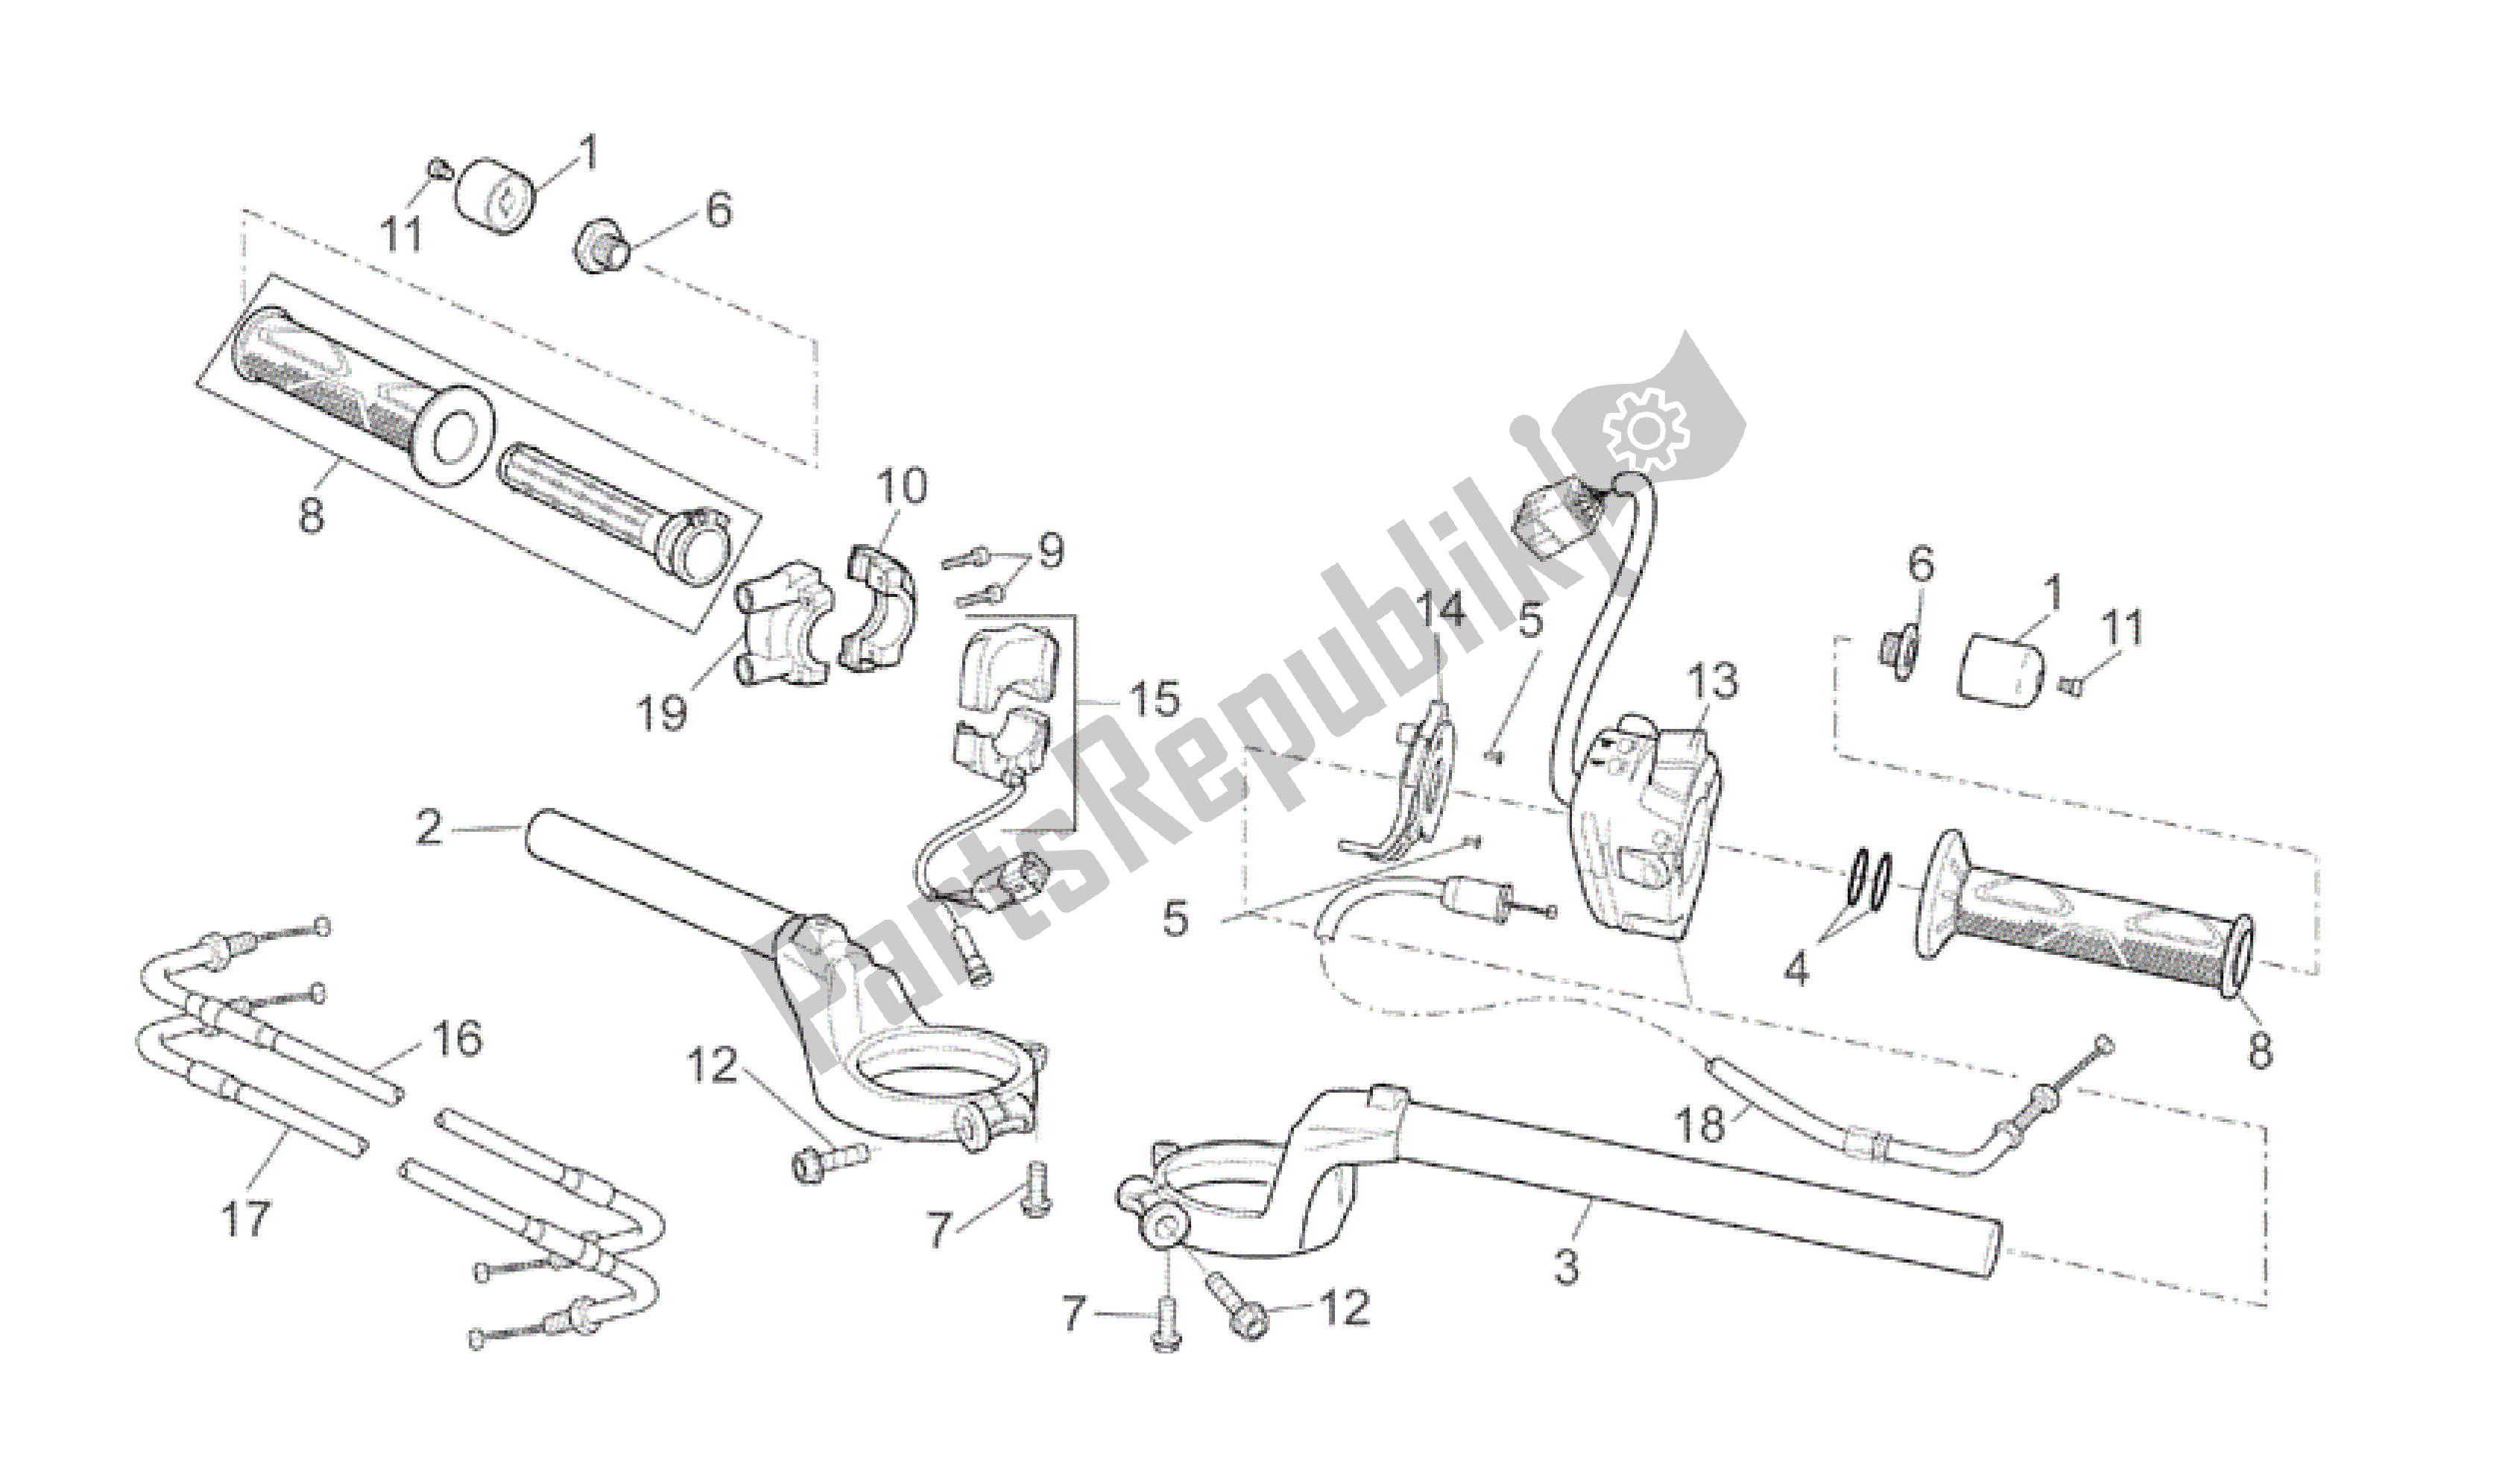 All parts for the Handlebar of the Aprilia RSV Mille R GP1 Limited Edition 3963 1000 2003